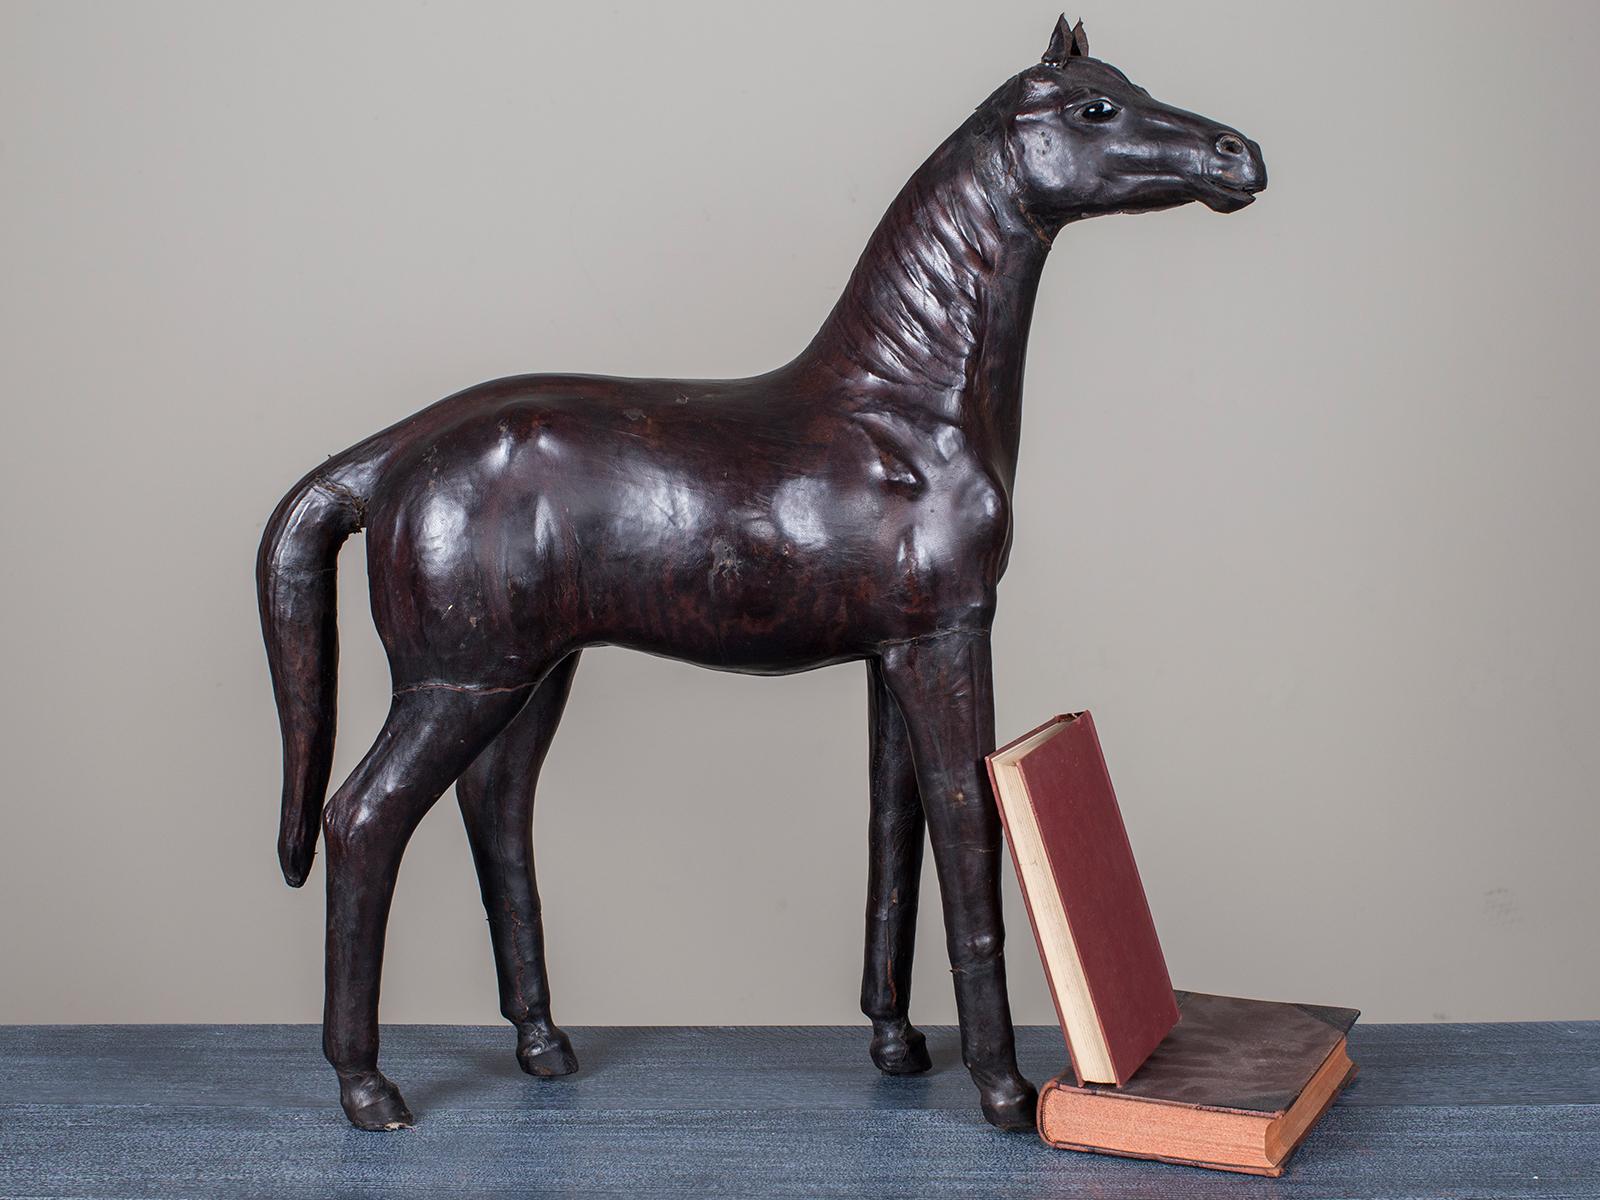 The superb pose of this vintage English thoroughbred horse from England circa 1920 echoes those favoured by the Queen of England. This example is sheathed entirely in leather and was made by the famed Liberty of England. Liberty of London is one of